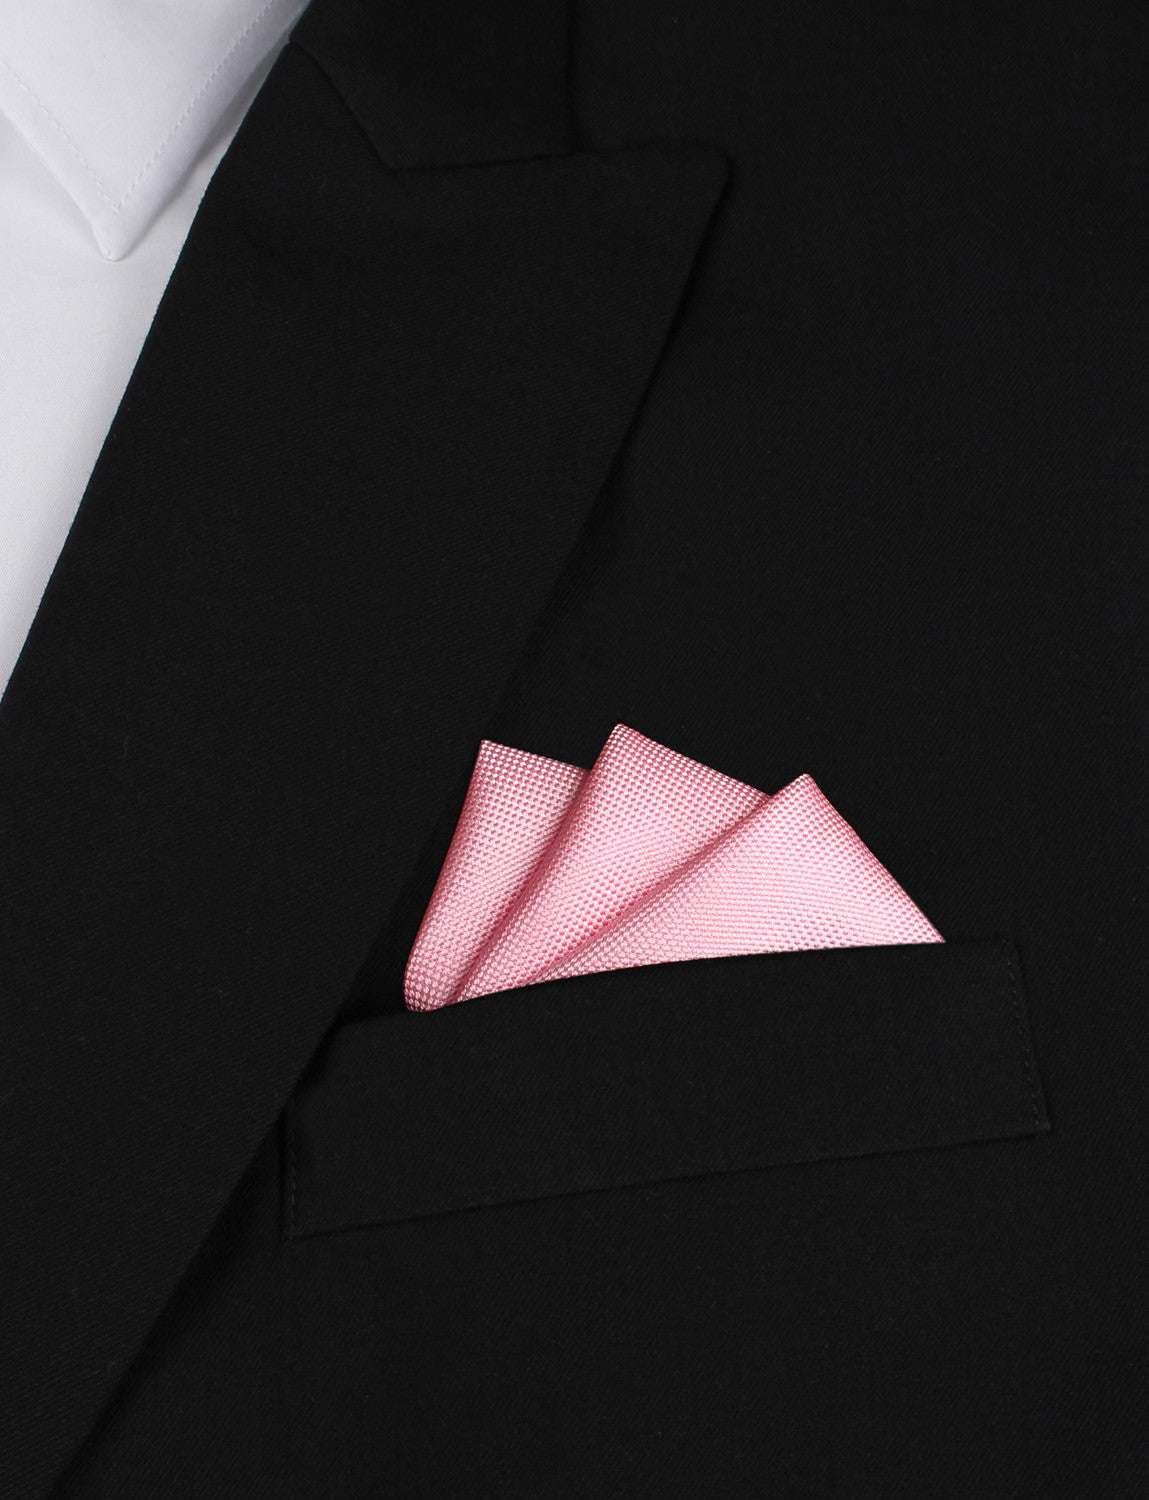 Baby Pink Oxygen Three Point Pocket Square Fold